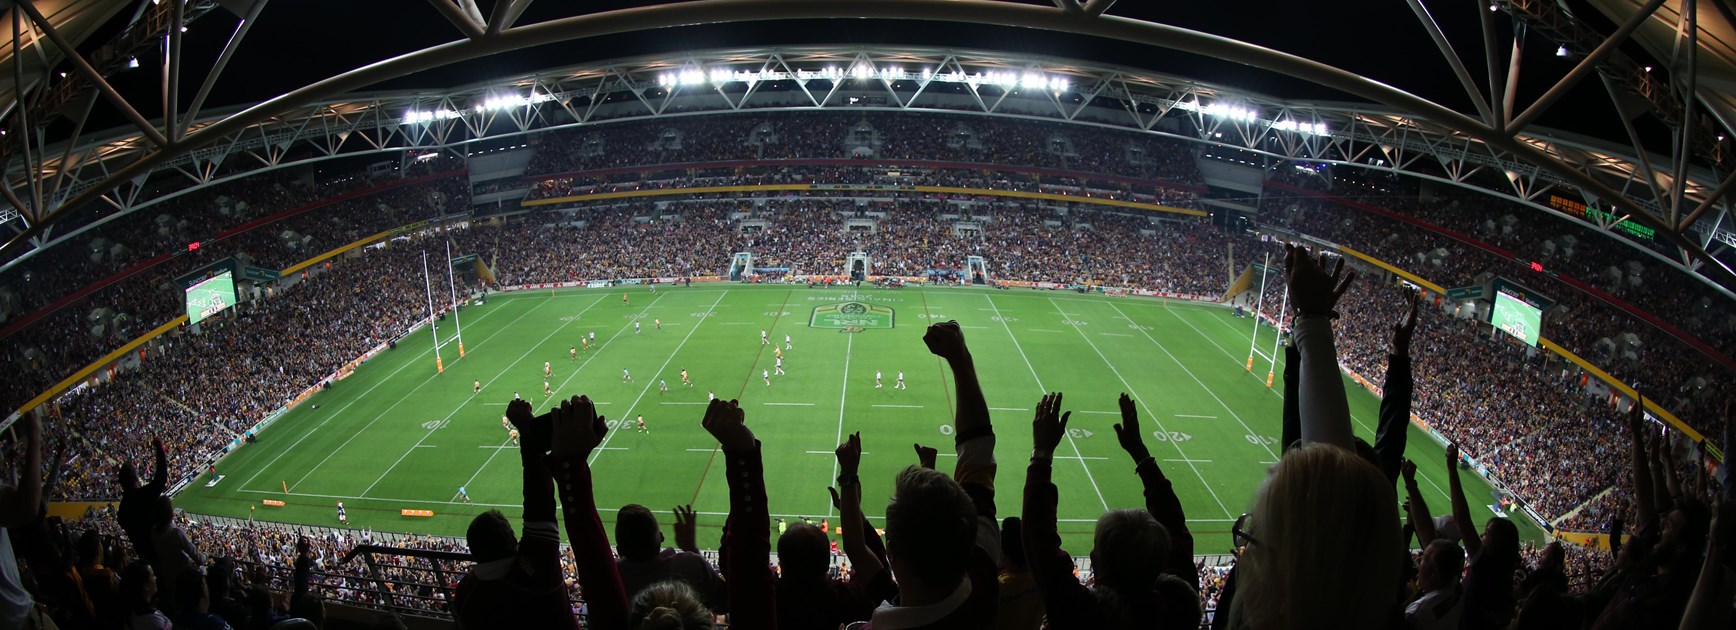 Catch Wests Tigers at Suncorp Stadium and Magic Round!